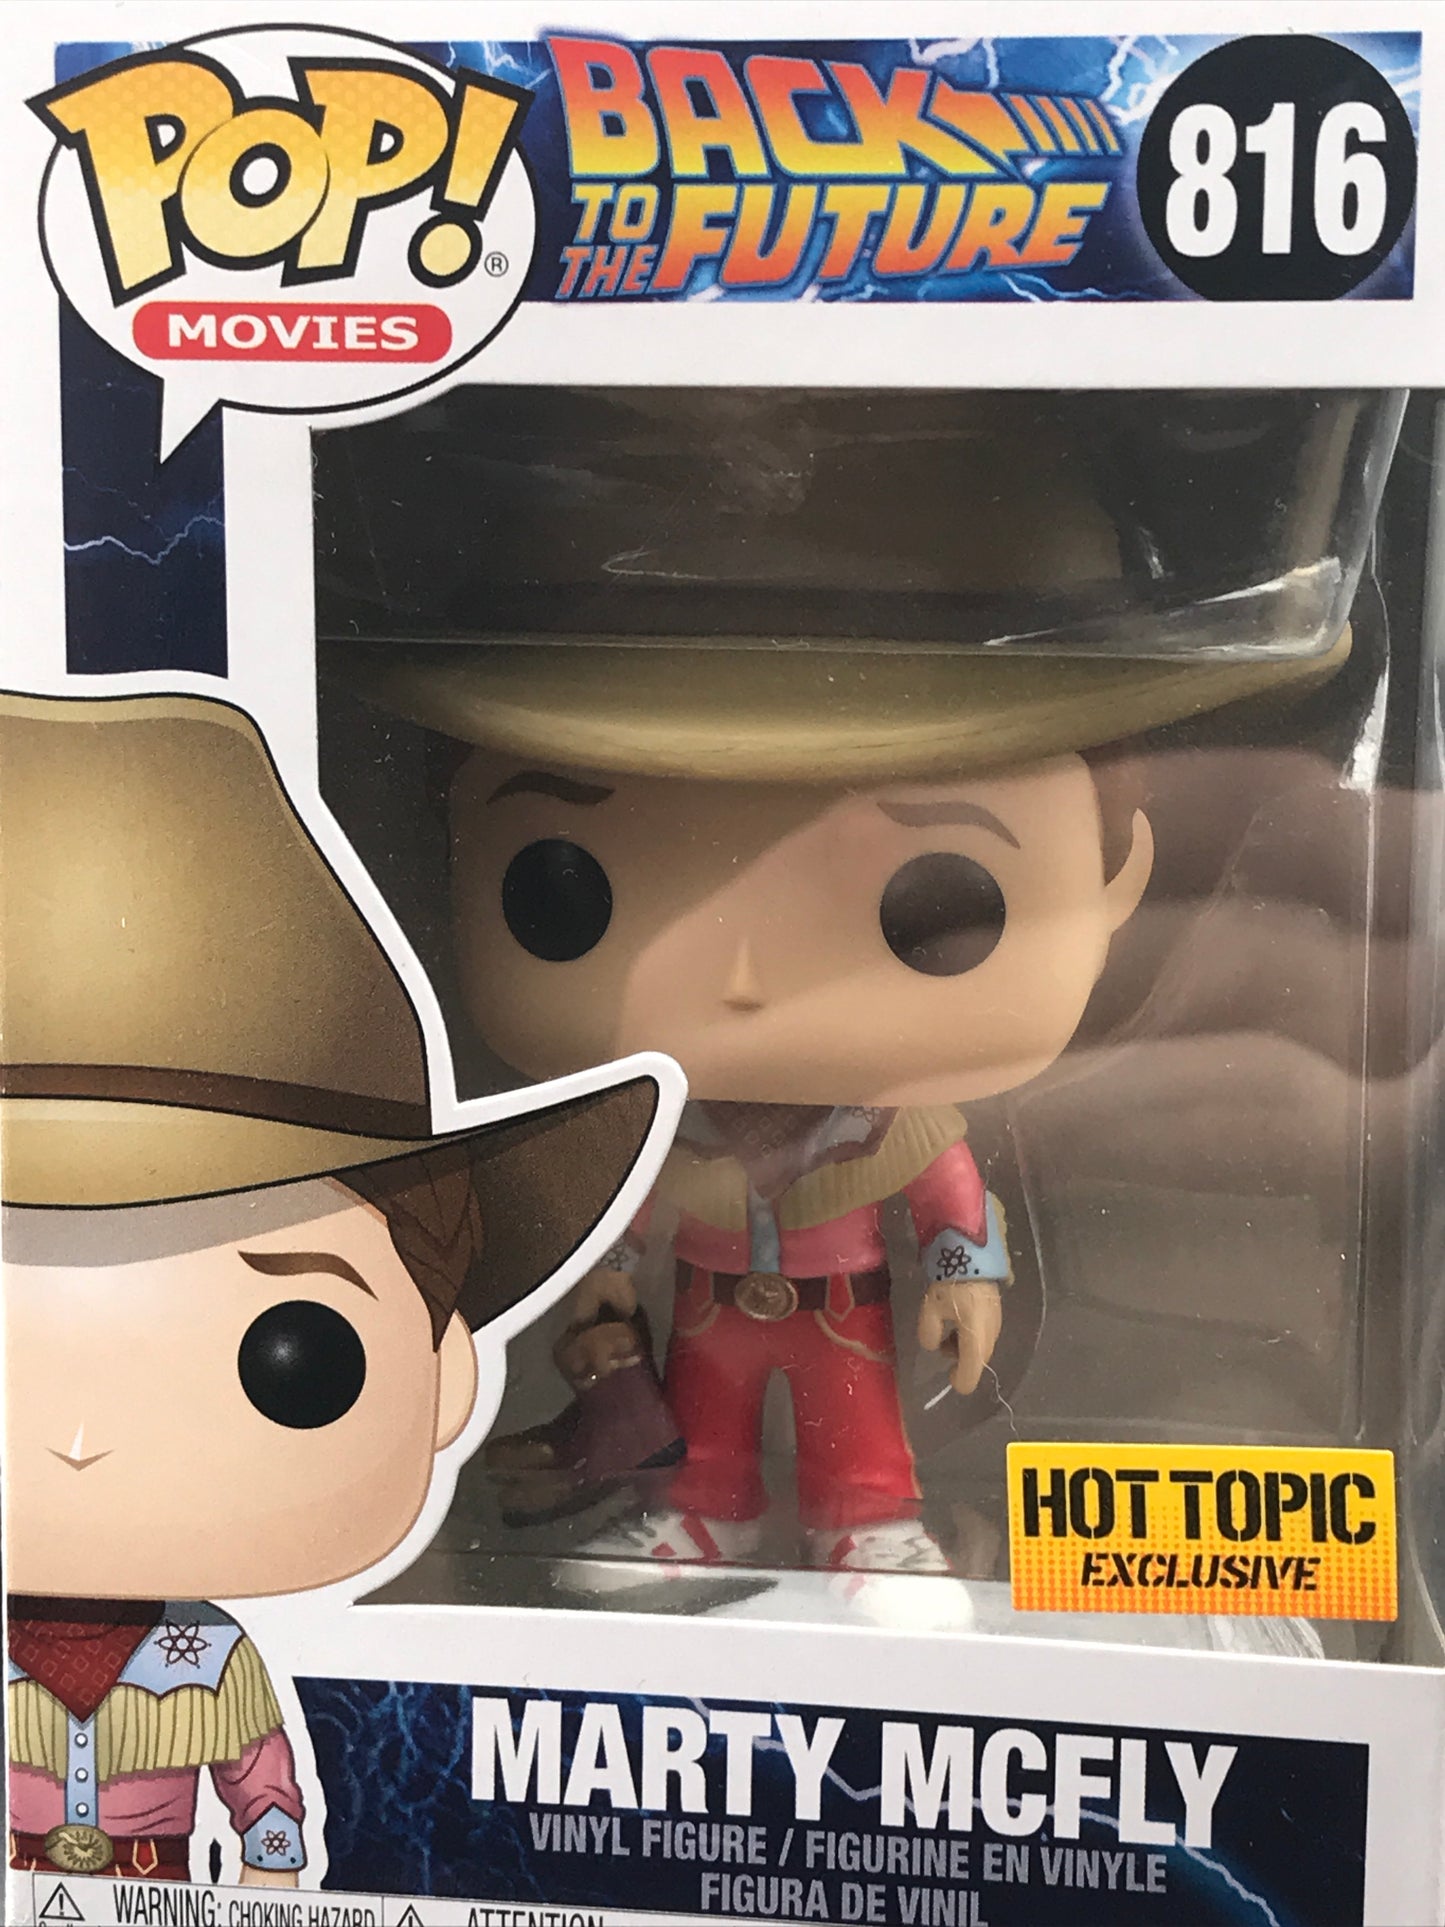 Back to the future 3 - Marty McFly Cowboy 816 - Funko Pop! Vinyl figure movie